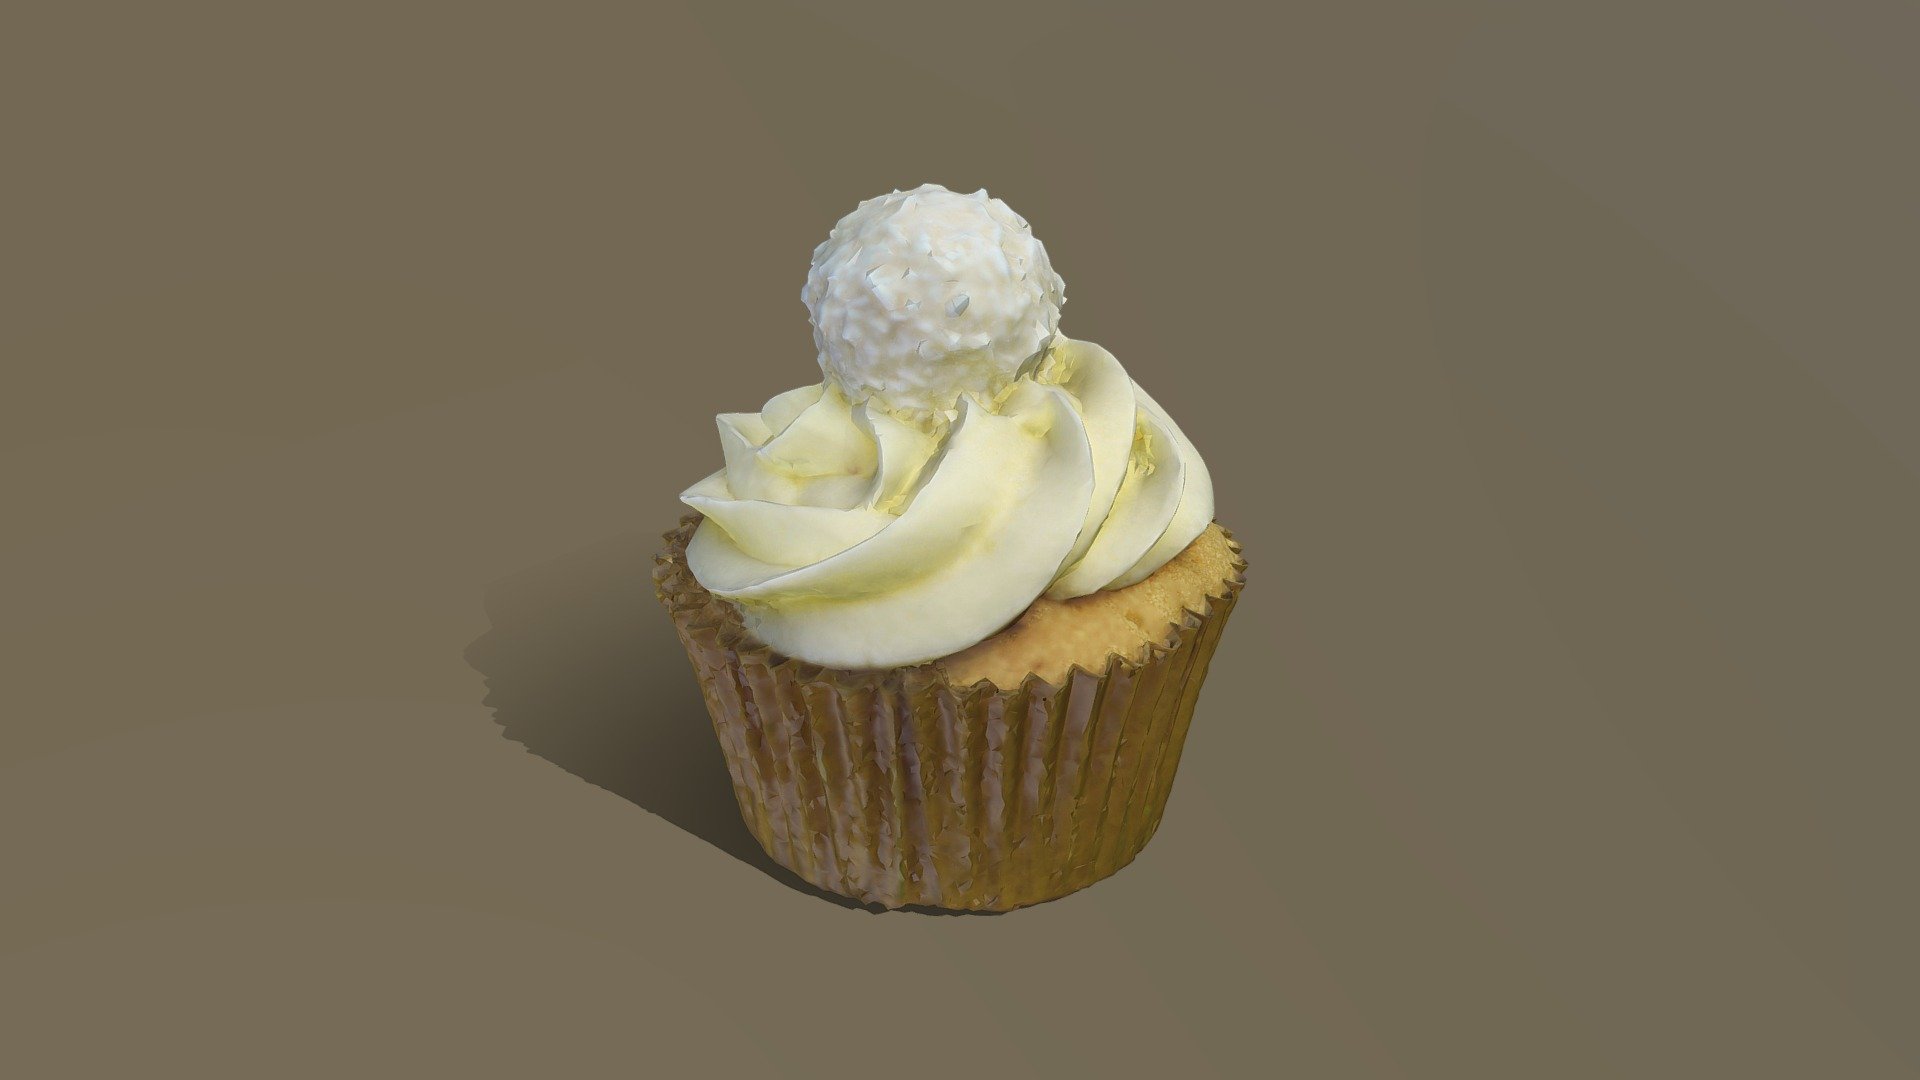 This Ferrero Raffaello Vanilla Cupcake model was created using photogrammetry which is made by CAKESBURG Premium Cake Shop in the UK. You can purchase real cake from this link: https://cakesburg.co.uk/products/cup-cakes-20x-1?_pos=1&amp;_sid=35555261d&amp;_ss=r

Textures 4096*4096px PBR photoscan-based materials Base Color, Normal Map, Roughness) - Ferrero Raffaello Cupcake - Buy Royalty Free 3D model by Cakesburg Premium 3D Cake Shop (@Viscom_Cakesburg) 3d model